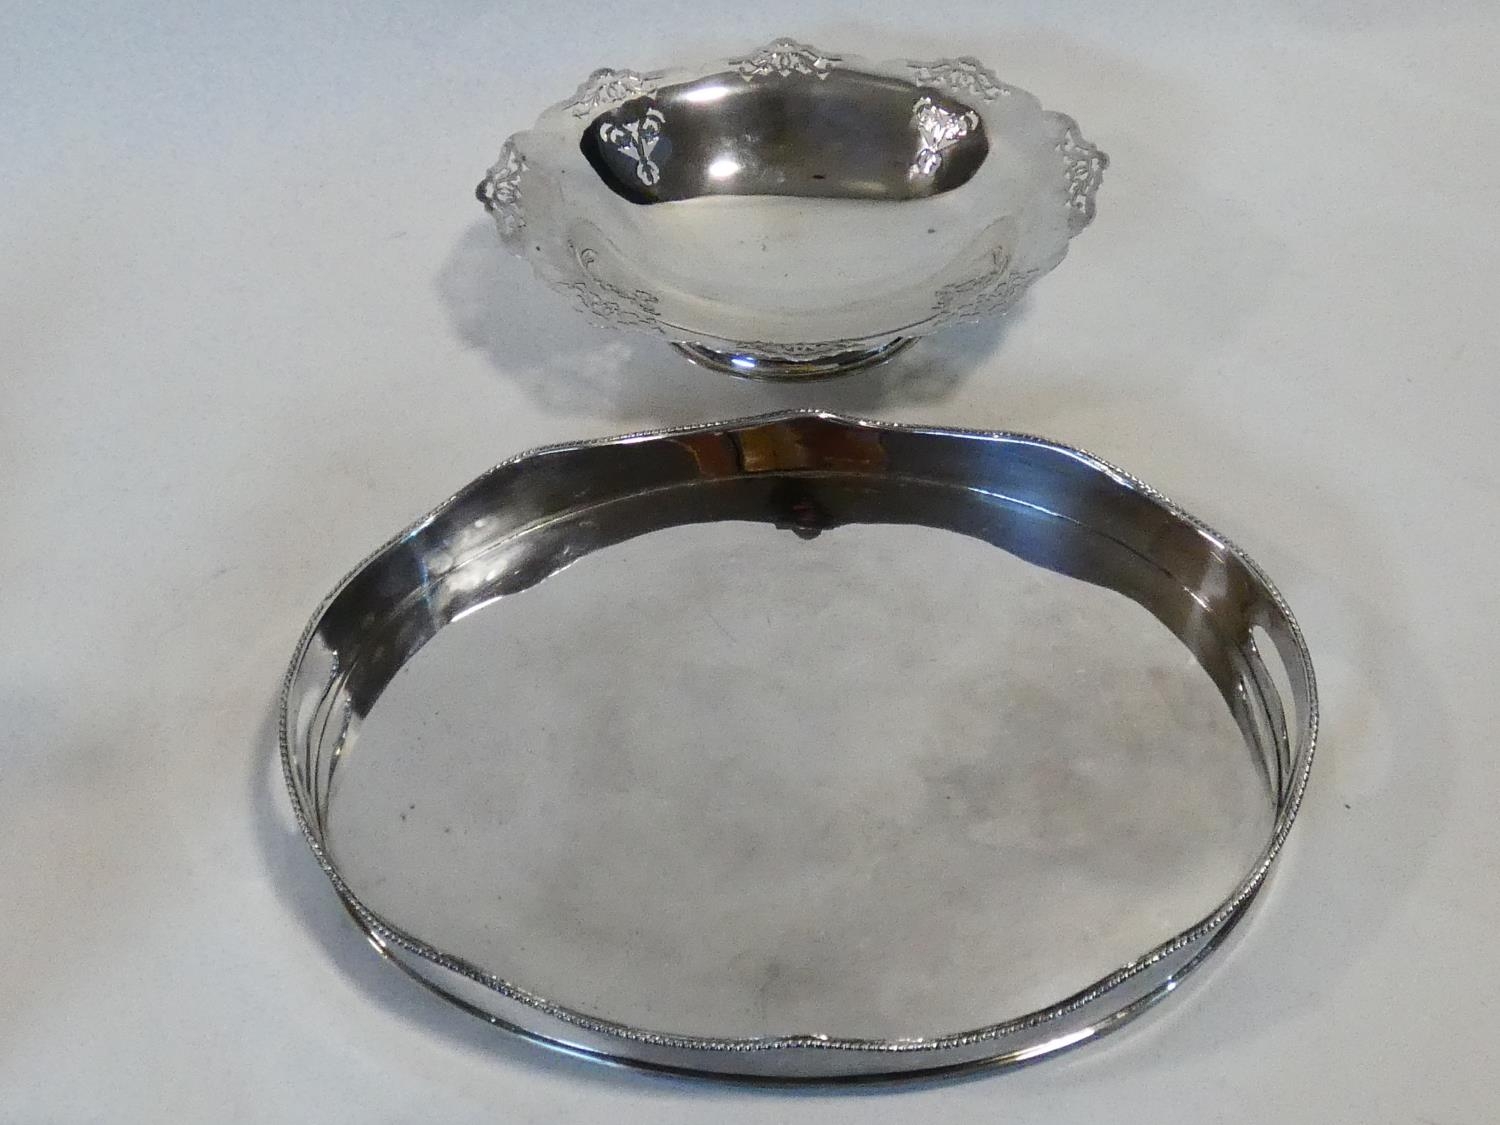 A silver plated twin handled galleried tray along with a silver plated comport with pierced